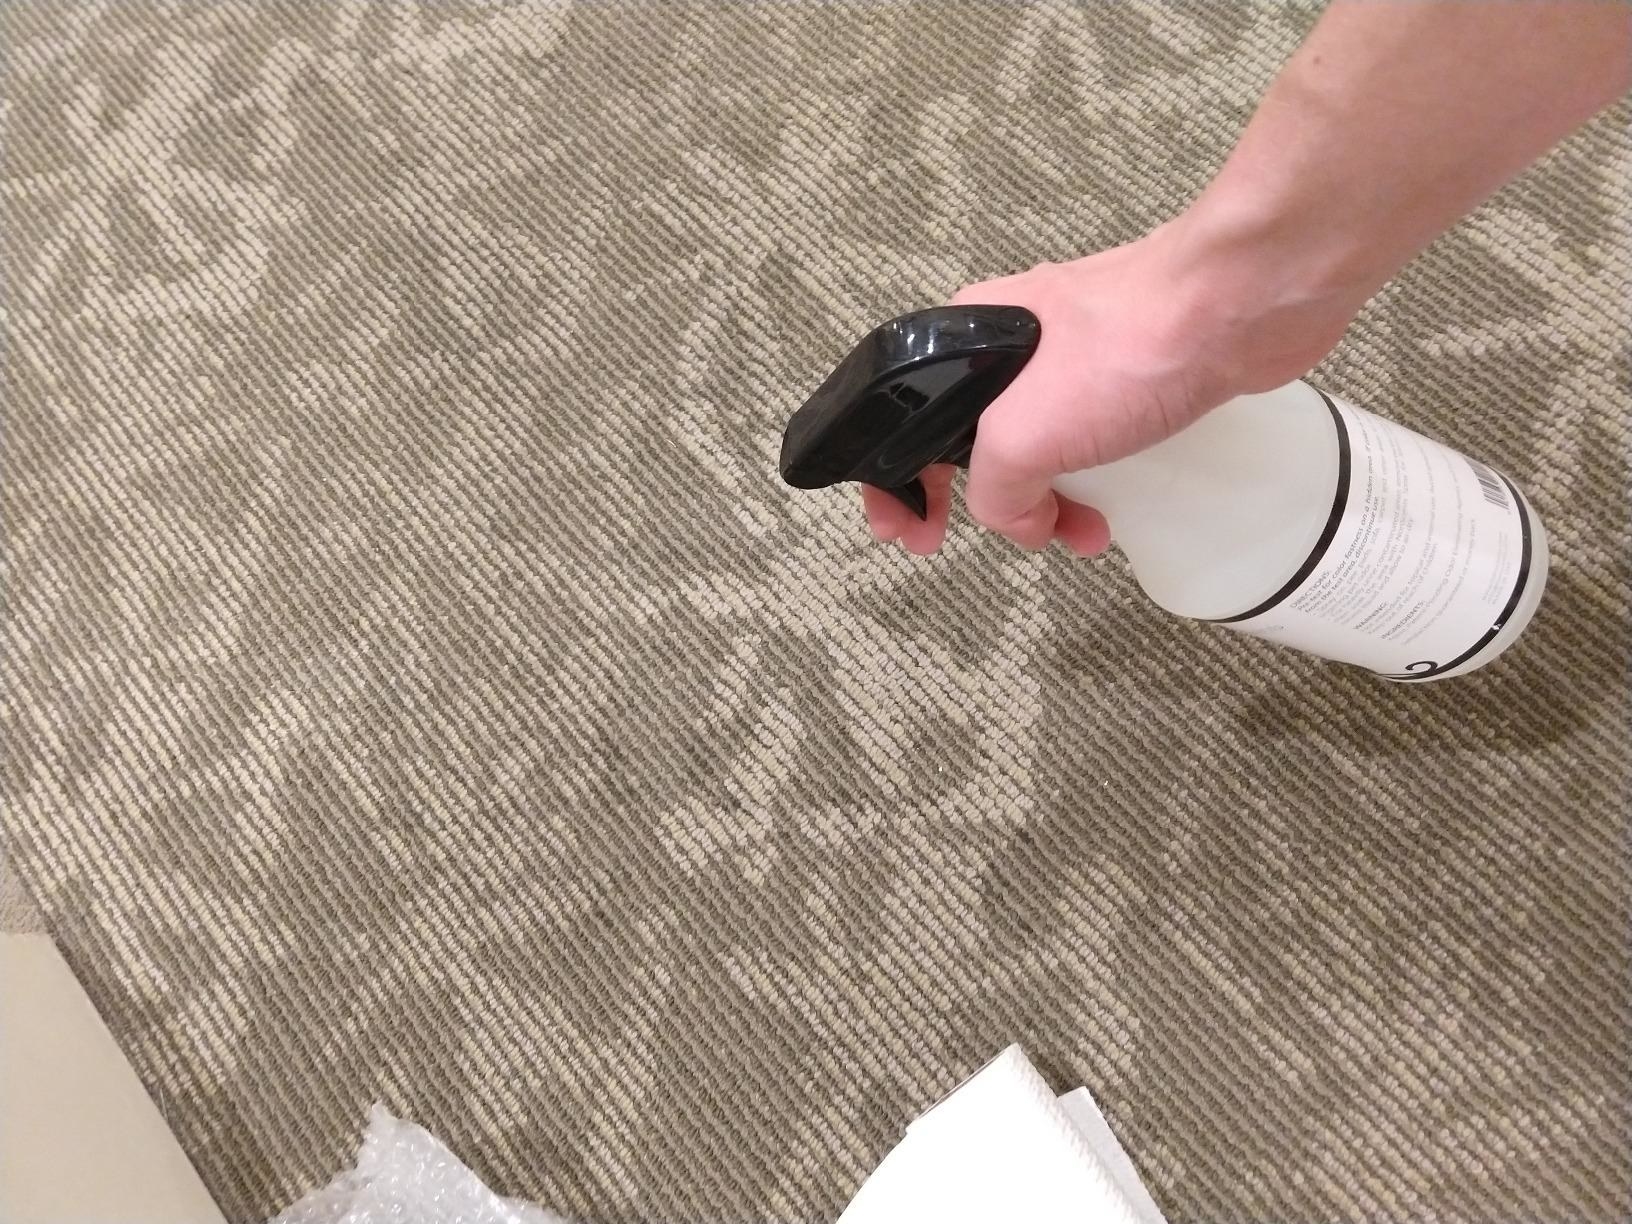 the spray being used on carpet